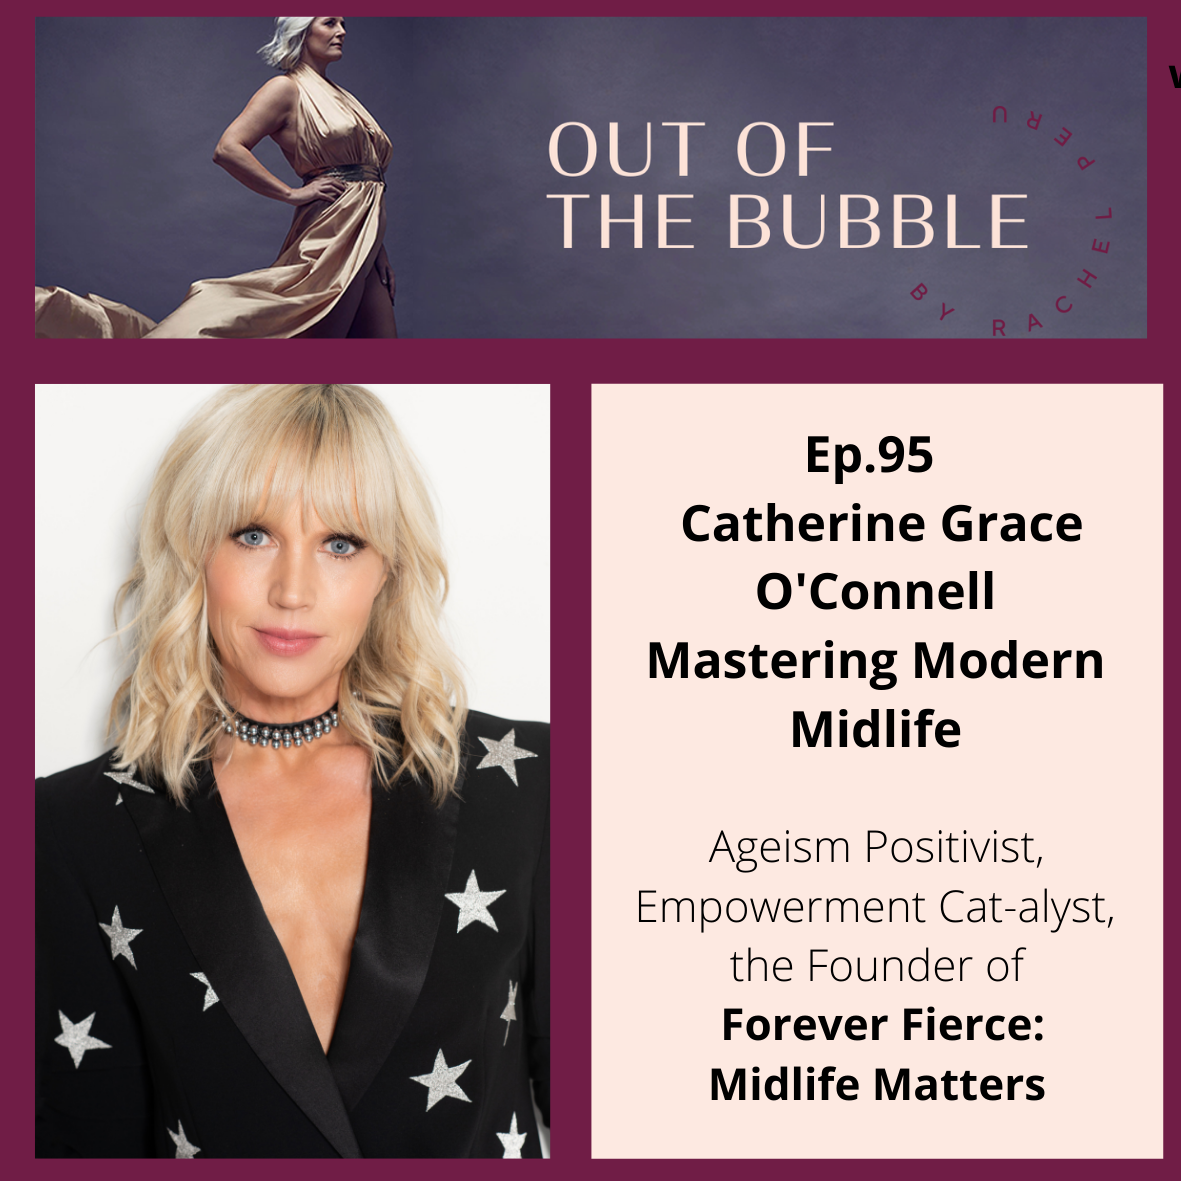 Ep.95 Liberte Free to Be with Ageism Positivist , Catherine Grace O'Connell.